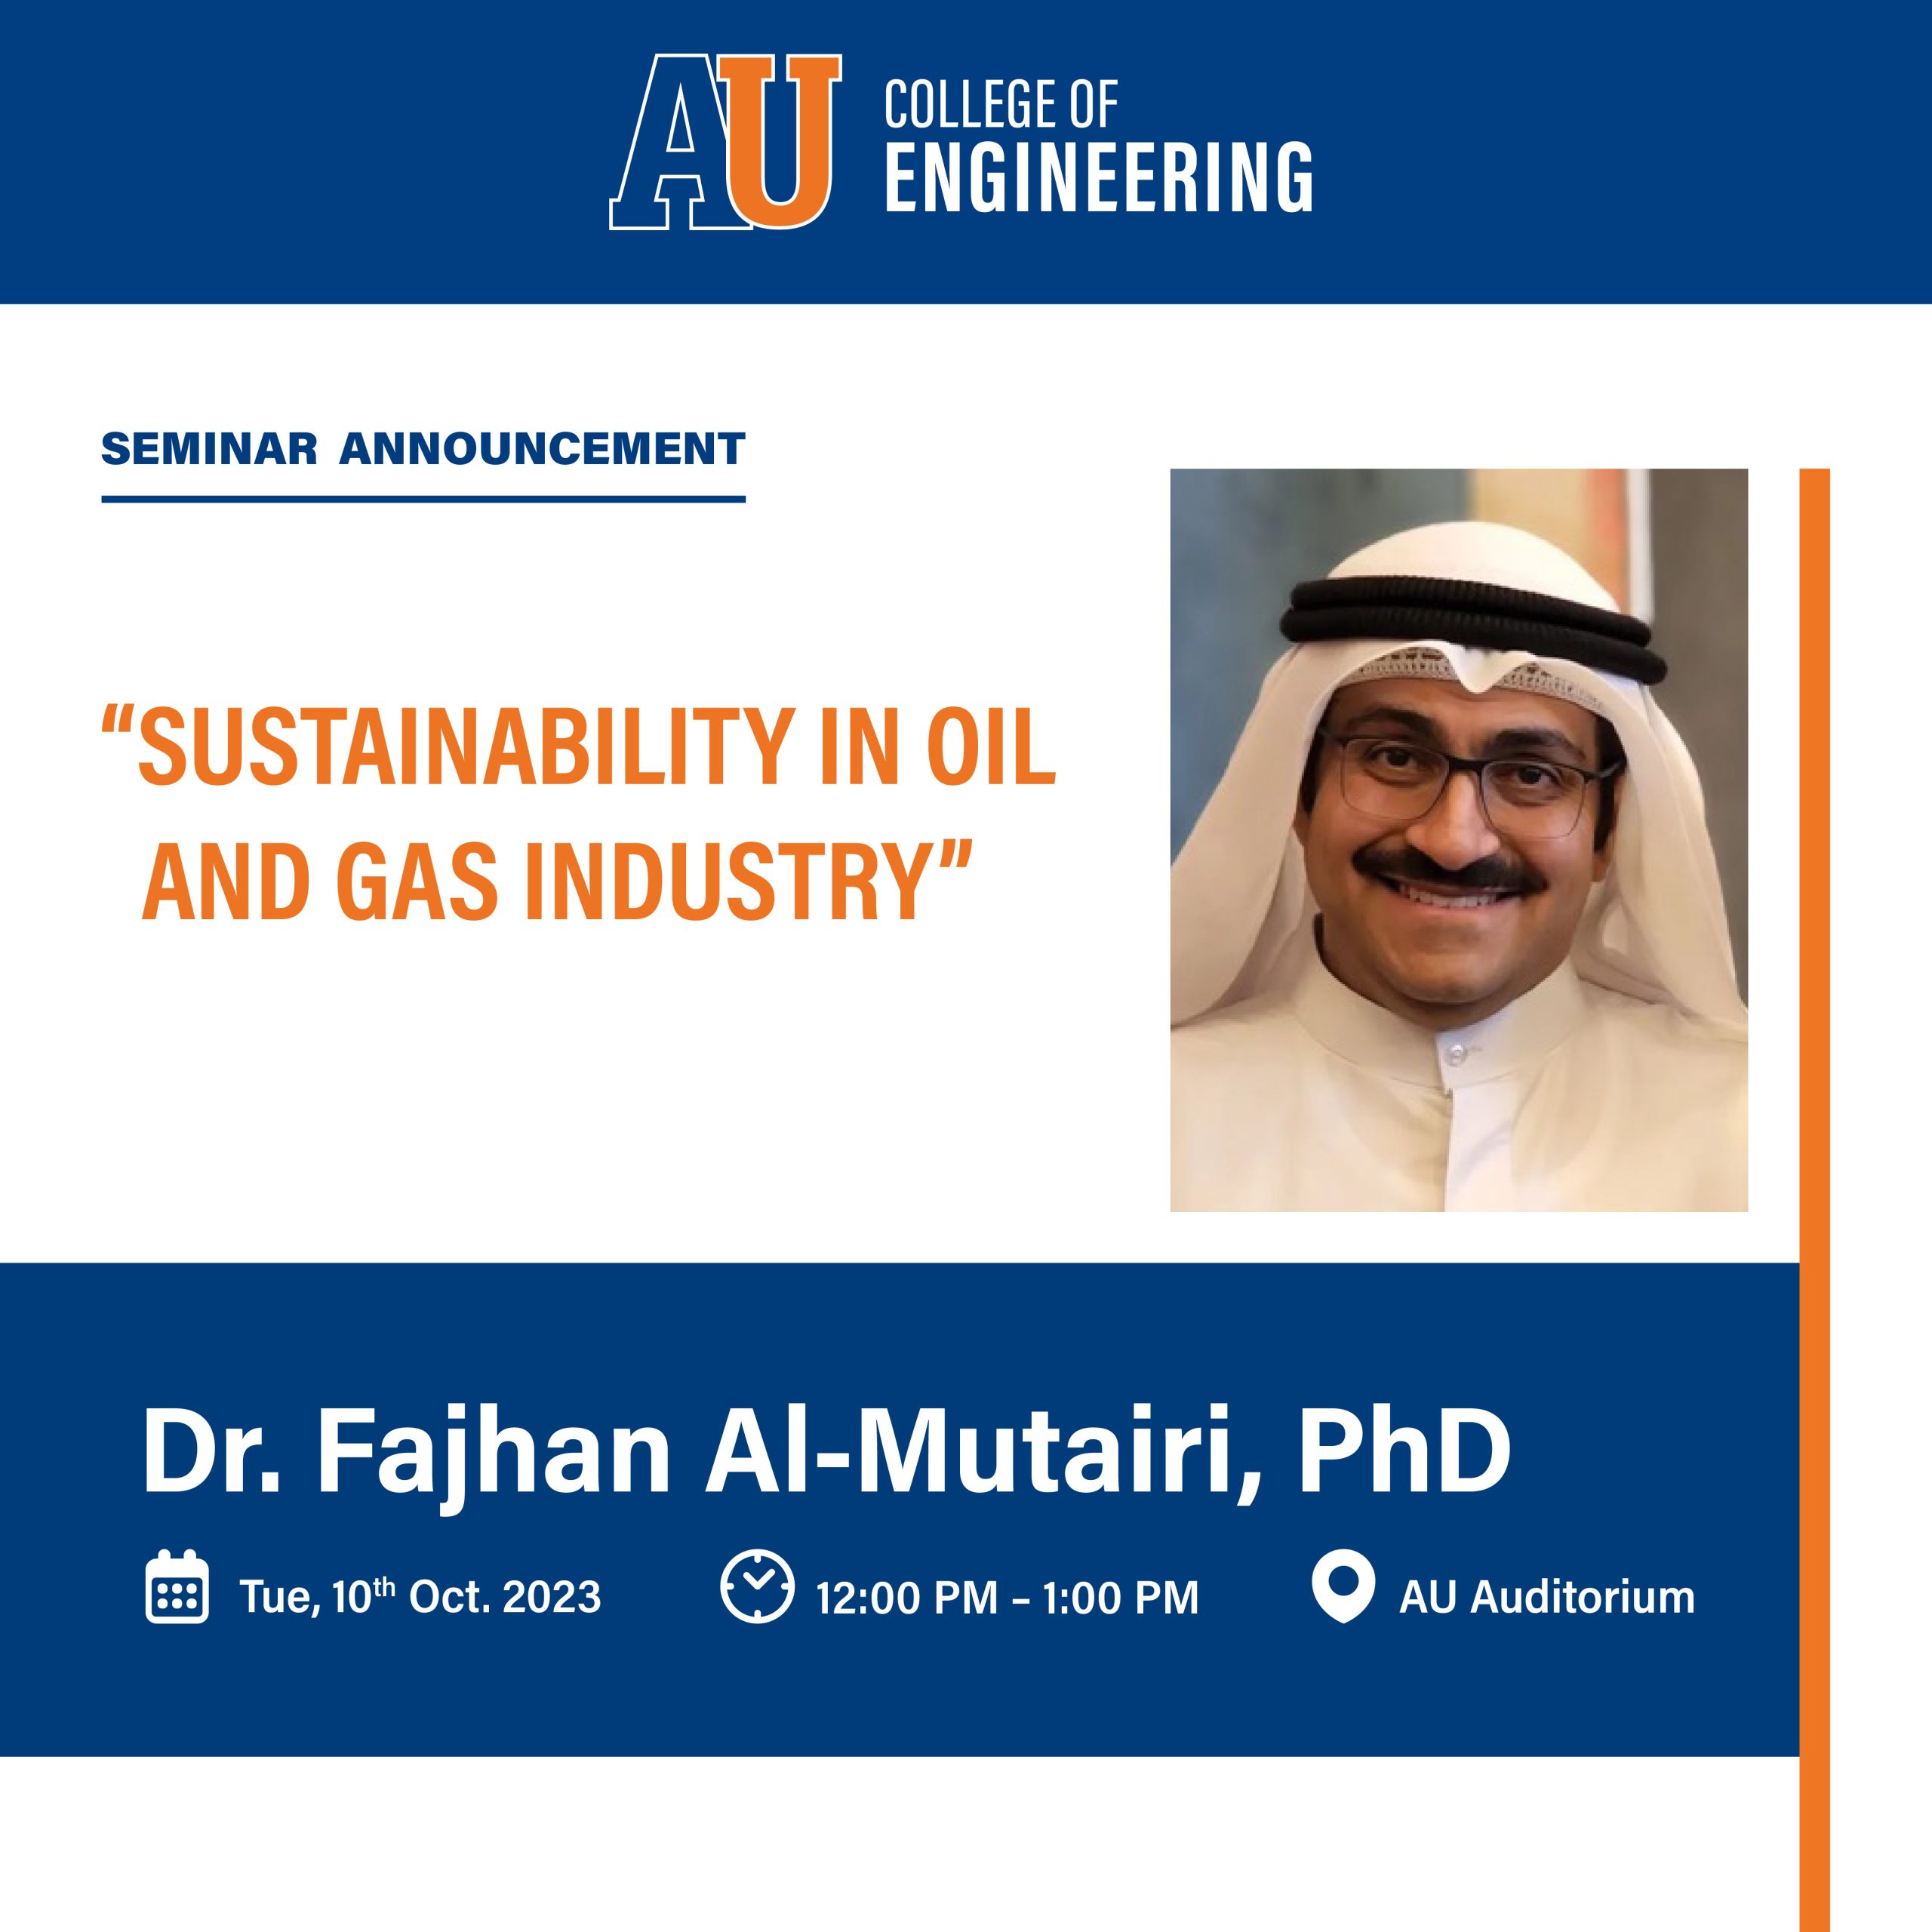 SUSTAINABILITY IN OIL AND GAS INDUSTRY